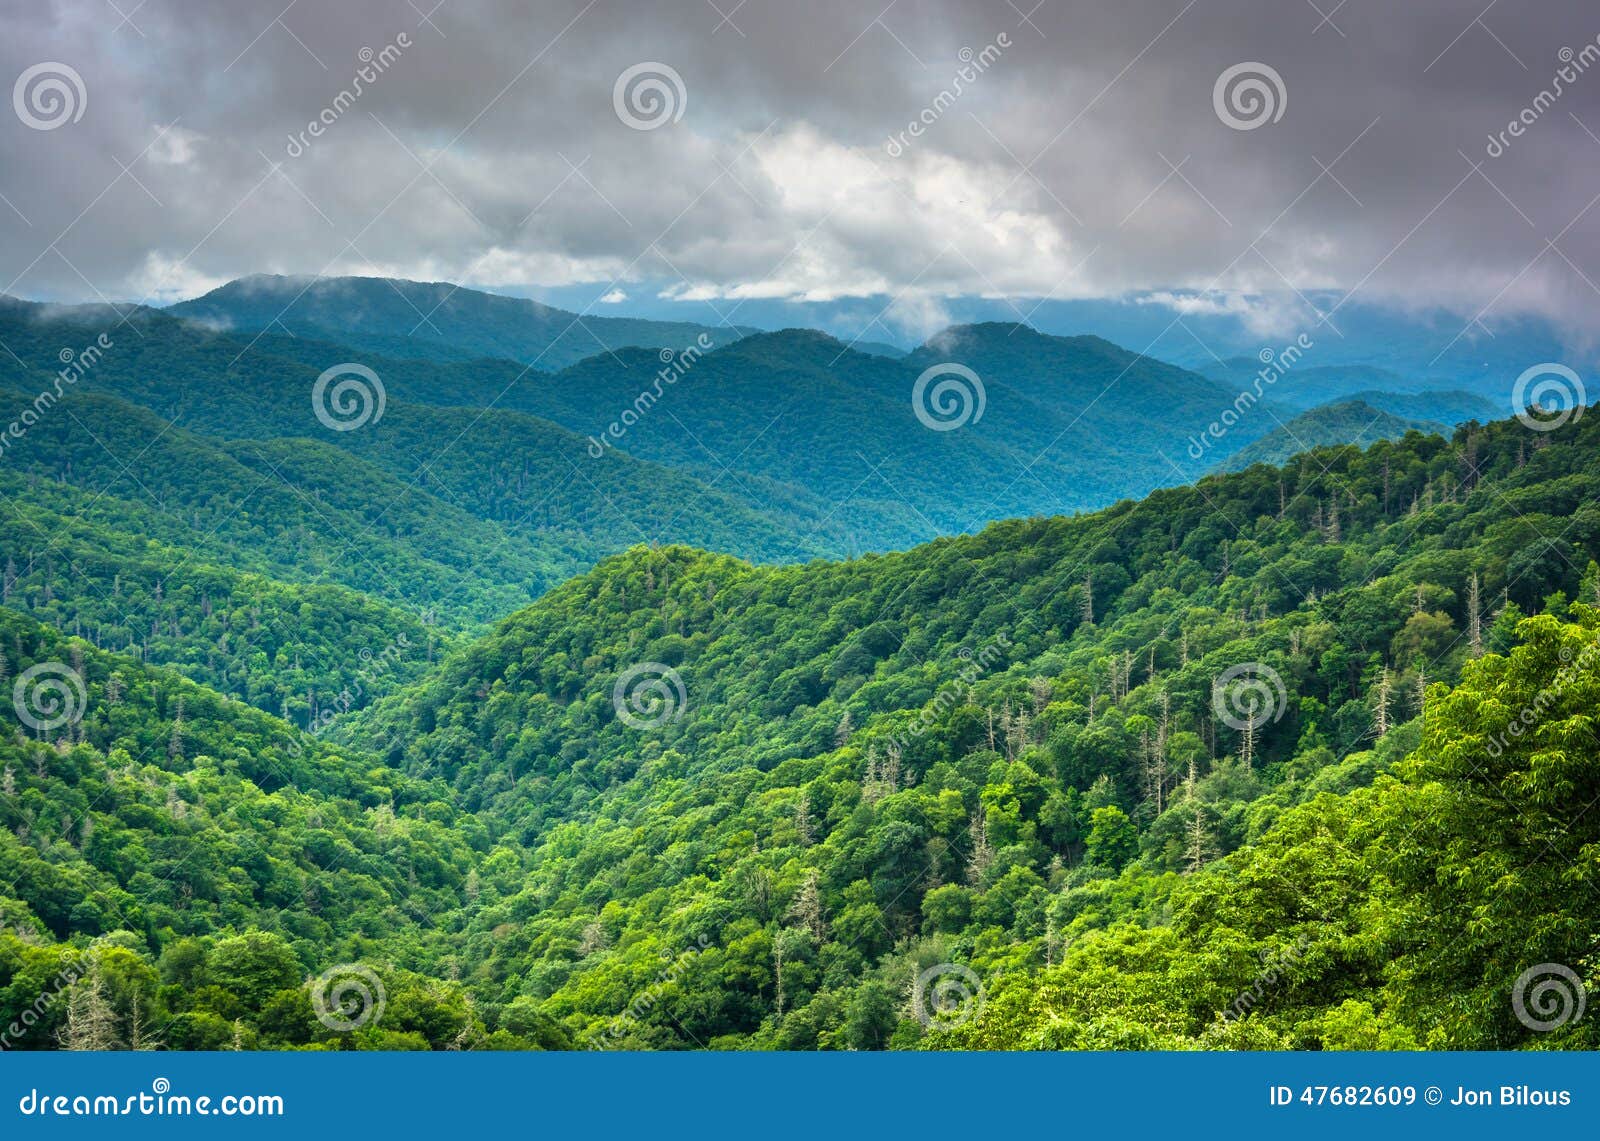 dramatic view of the appalachian mountains from newfound gap road, at great smoky mountains national park, tennessee.